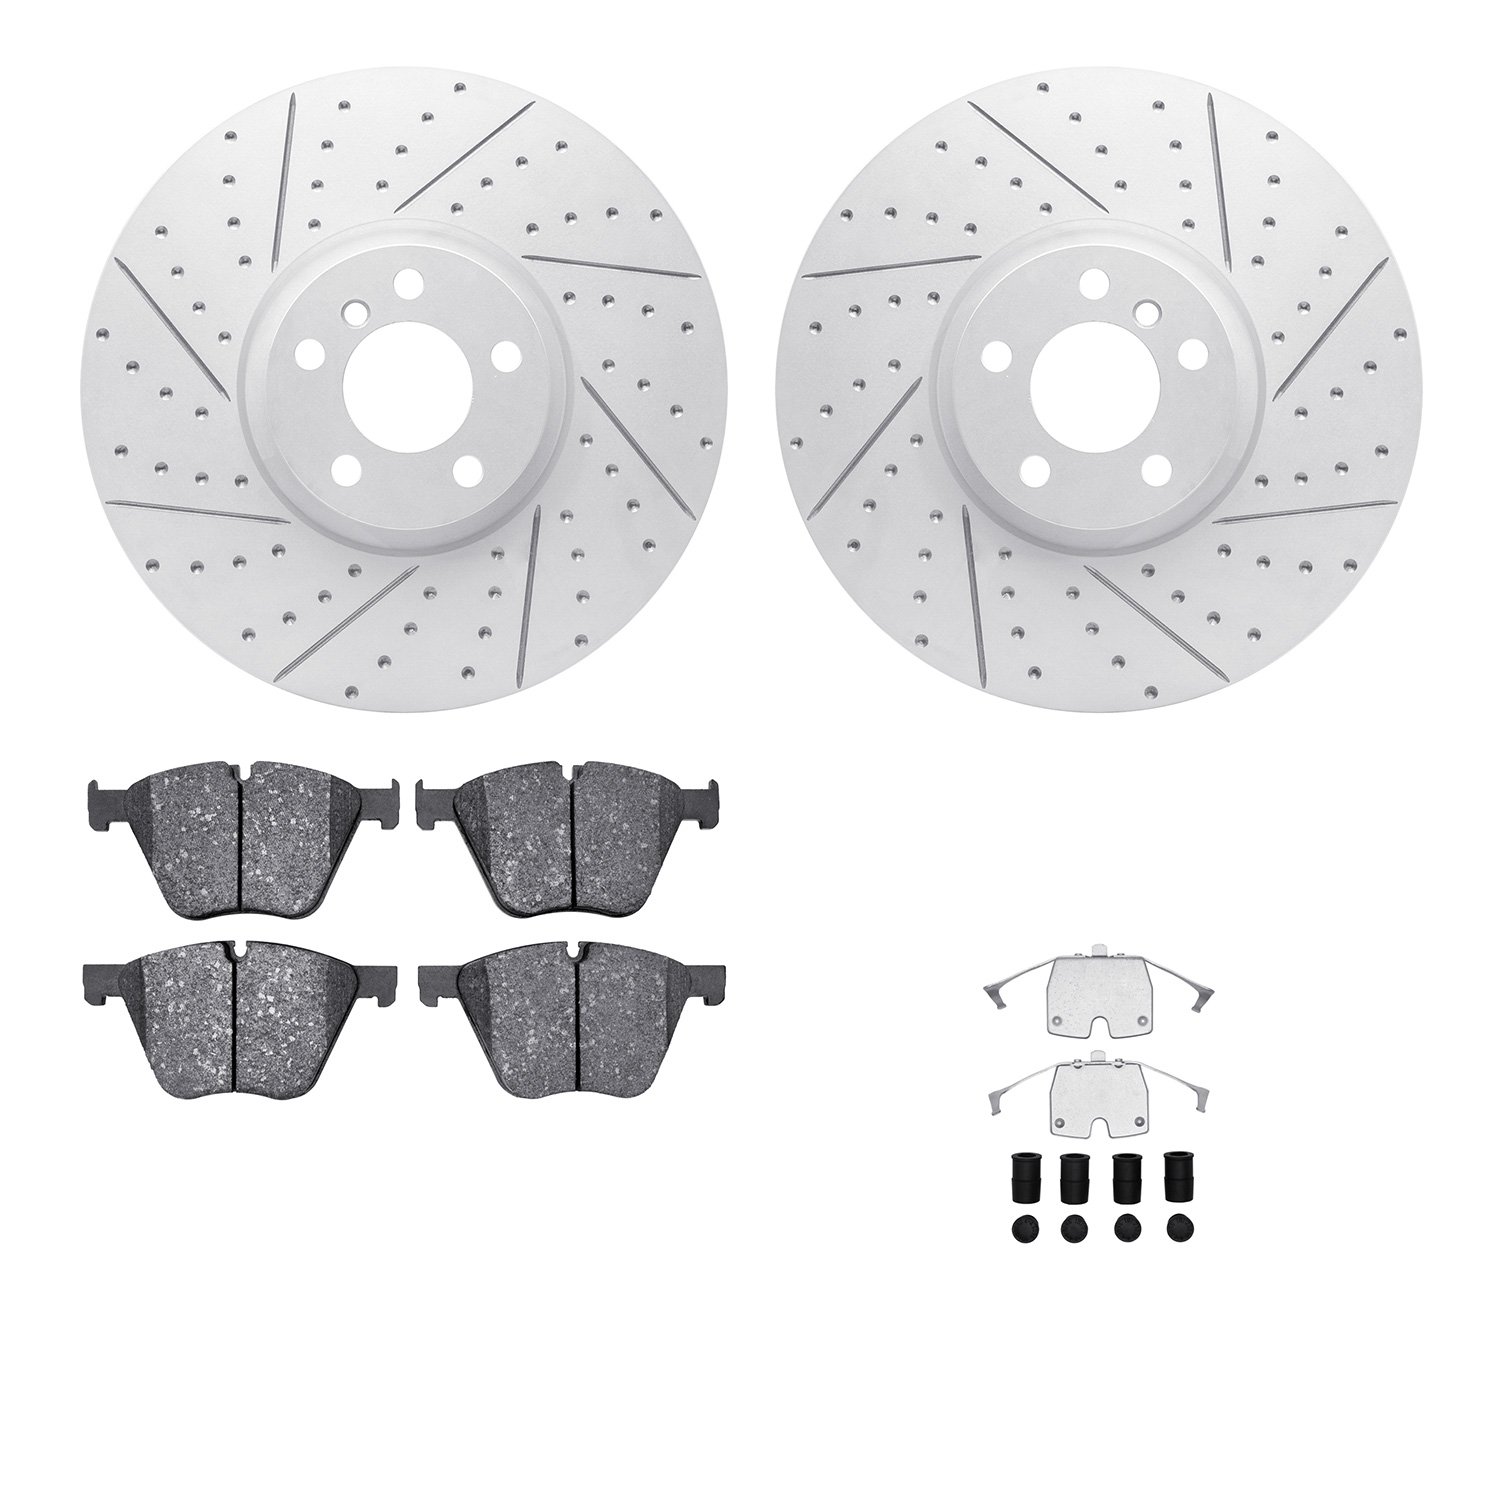 2512-31113 Geoperformance Drilled/Slotted Rotors w/5000 Advanced Brake Pads Kit & Hardware, 2010-2011 BMW, Position: Front